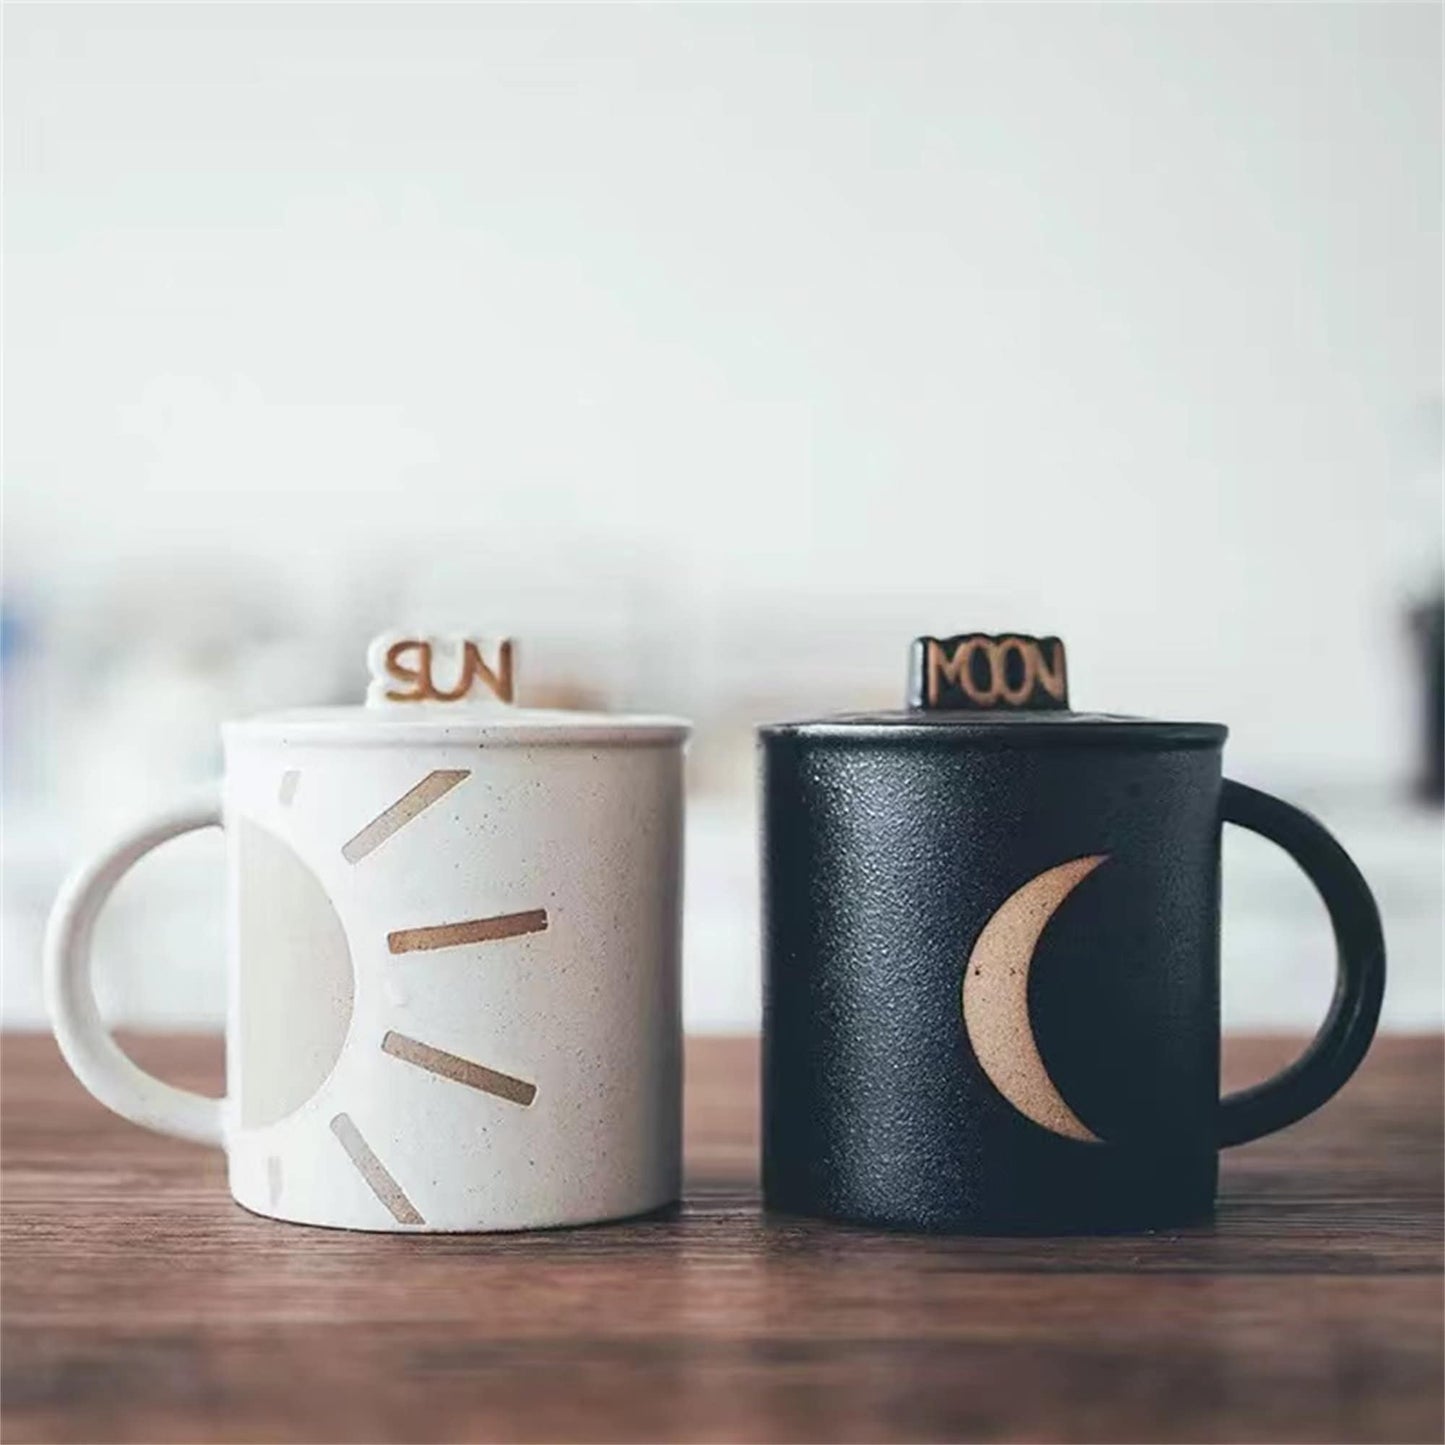 Ceramic Sun and Moon Couple Cup,Coffee Mug with lid, Wedding Anniversary Gifts for Her/ Him on Valentine's Day  - Ceramic Tea Cup 400ML